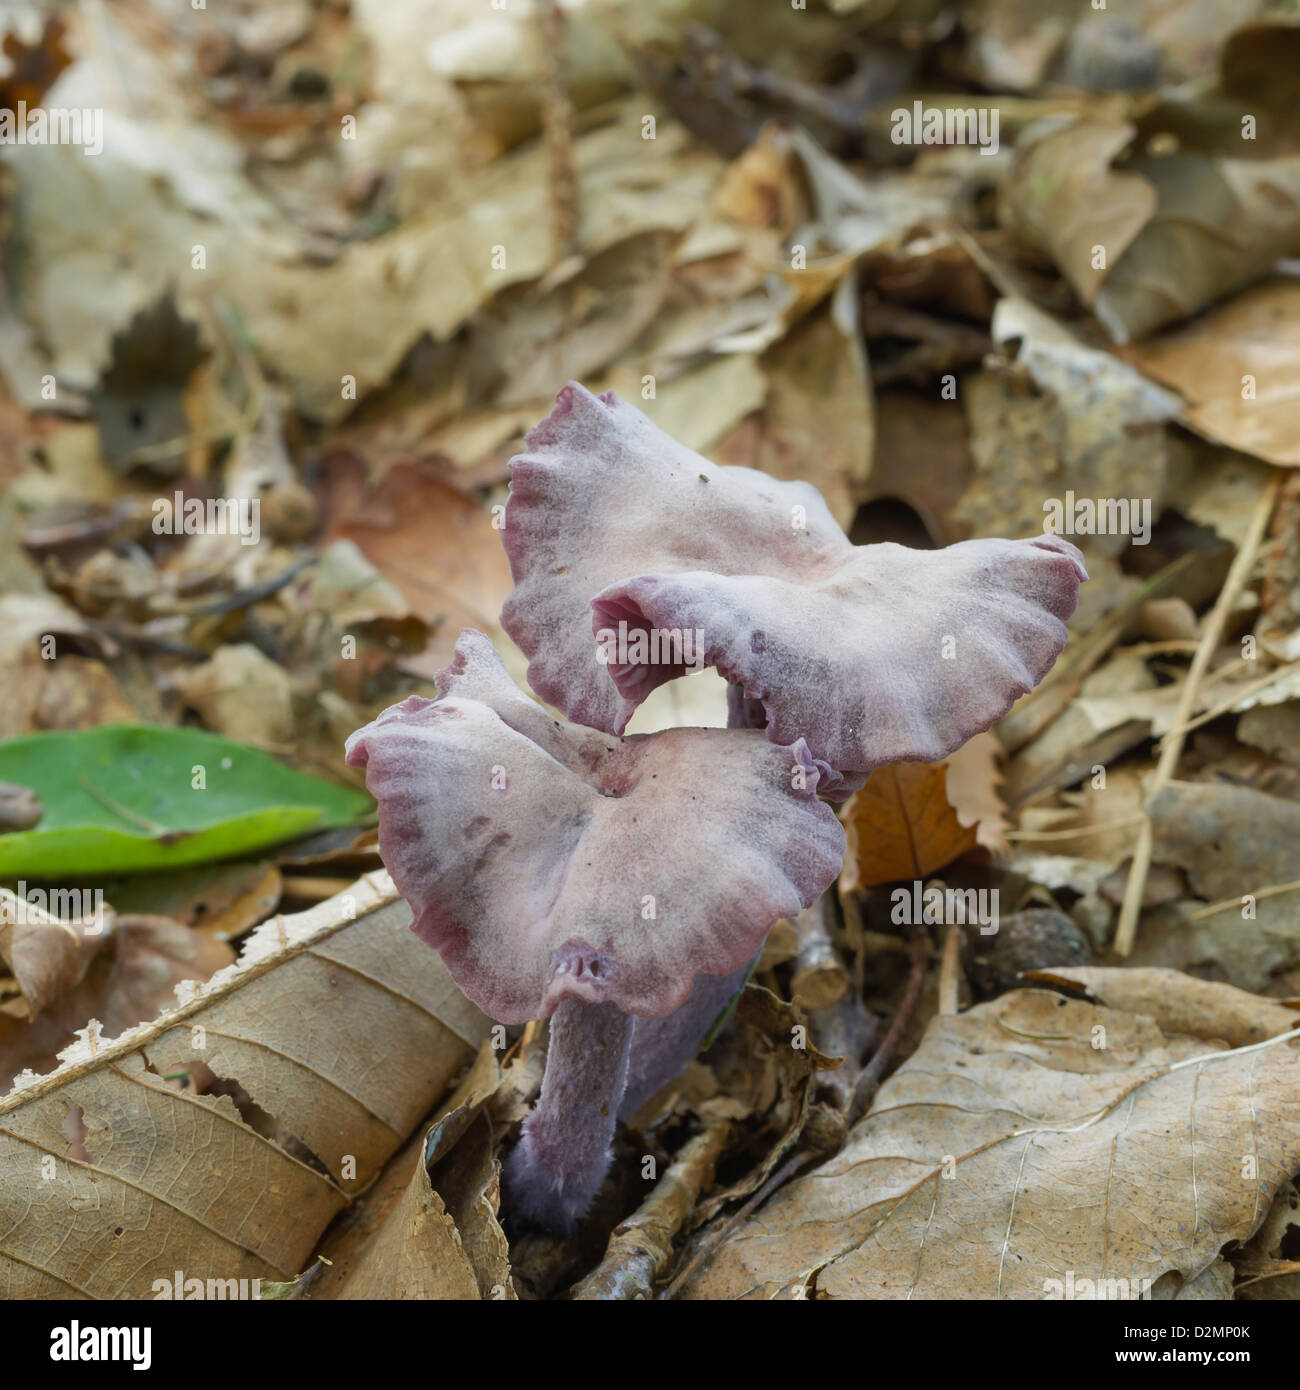 Amethyst deceiver Laccaria amethystina growing on forest floor Stock Photo